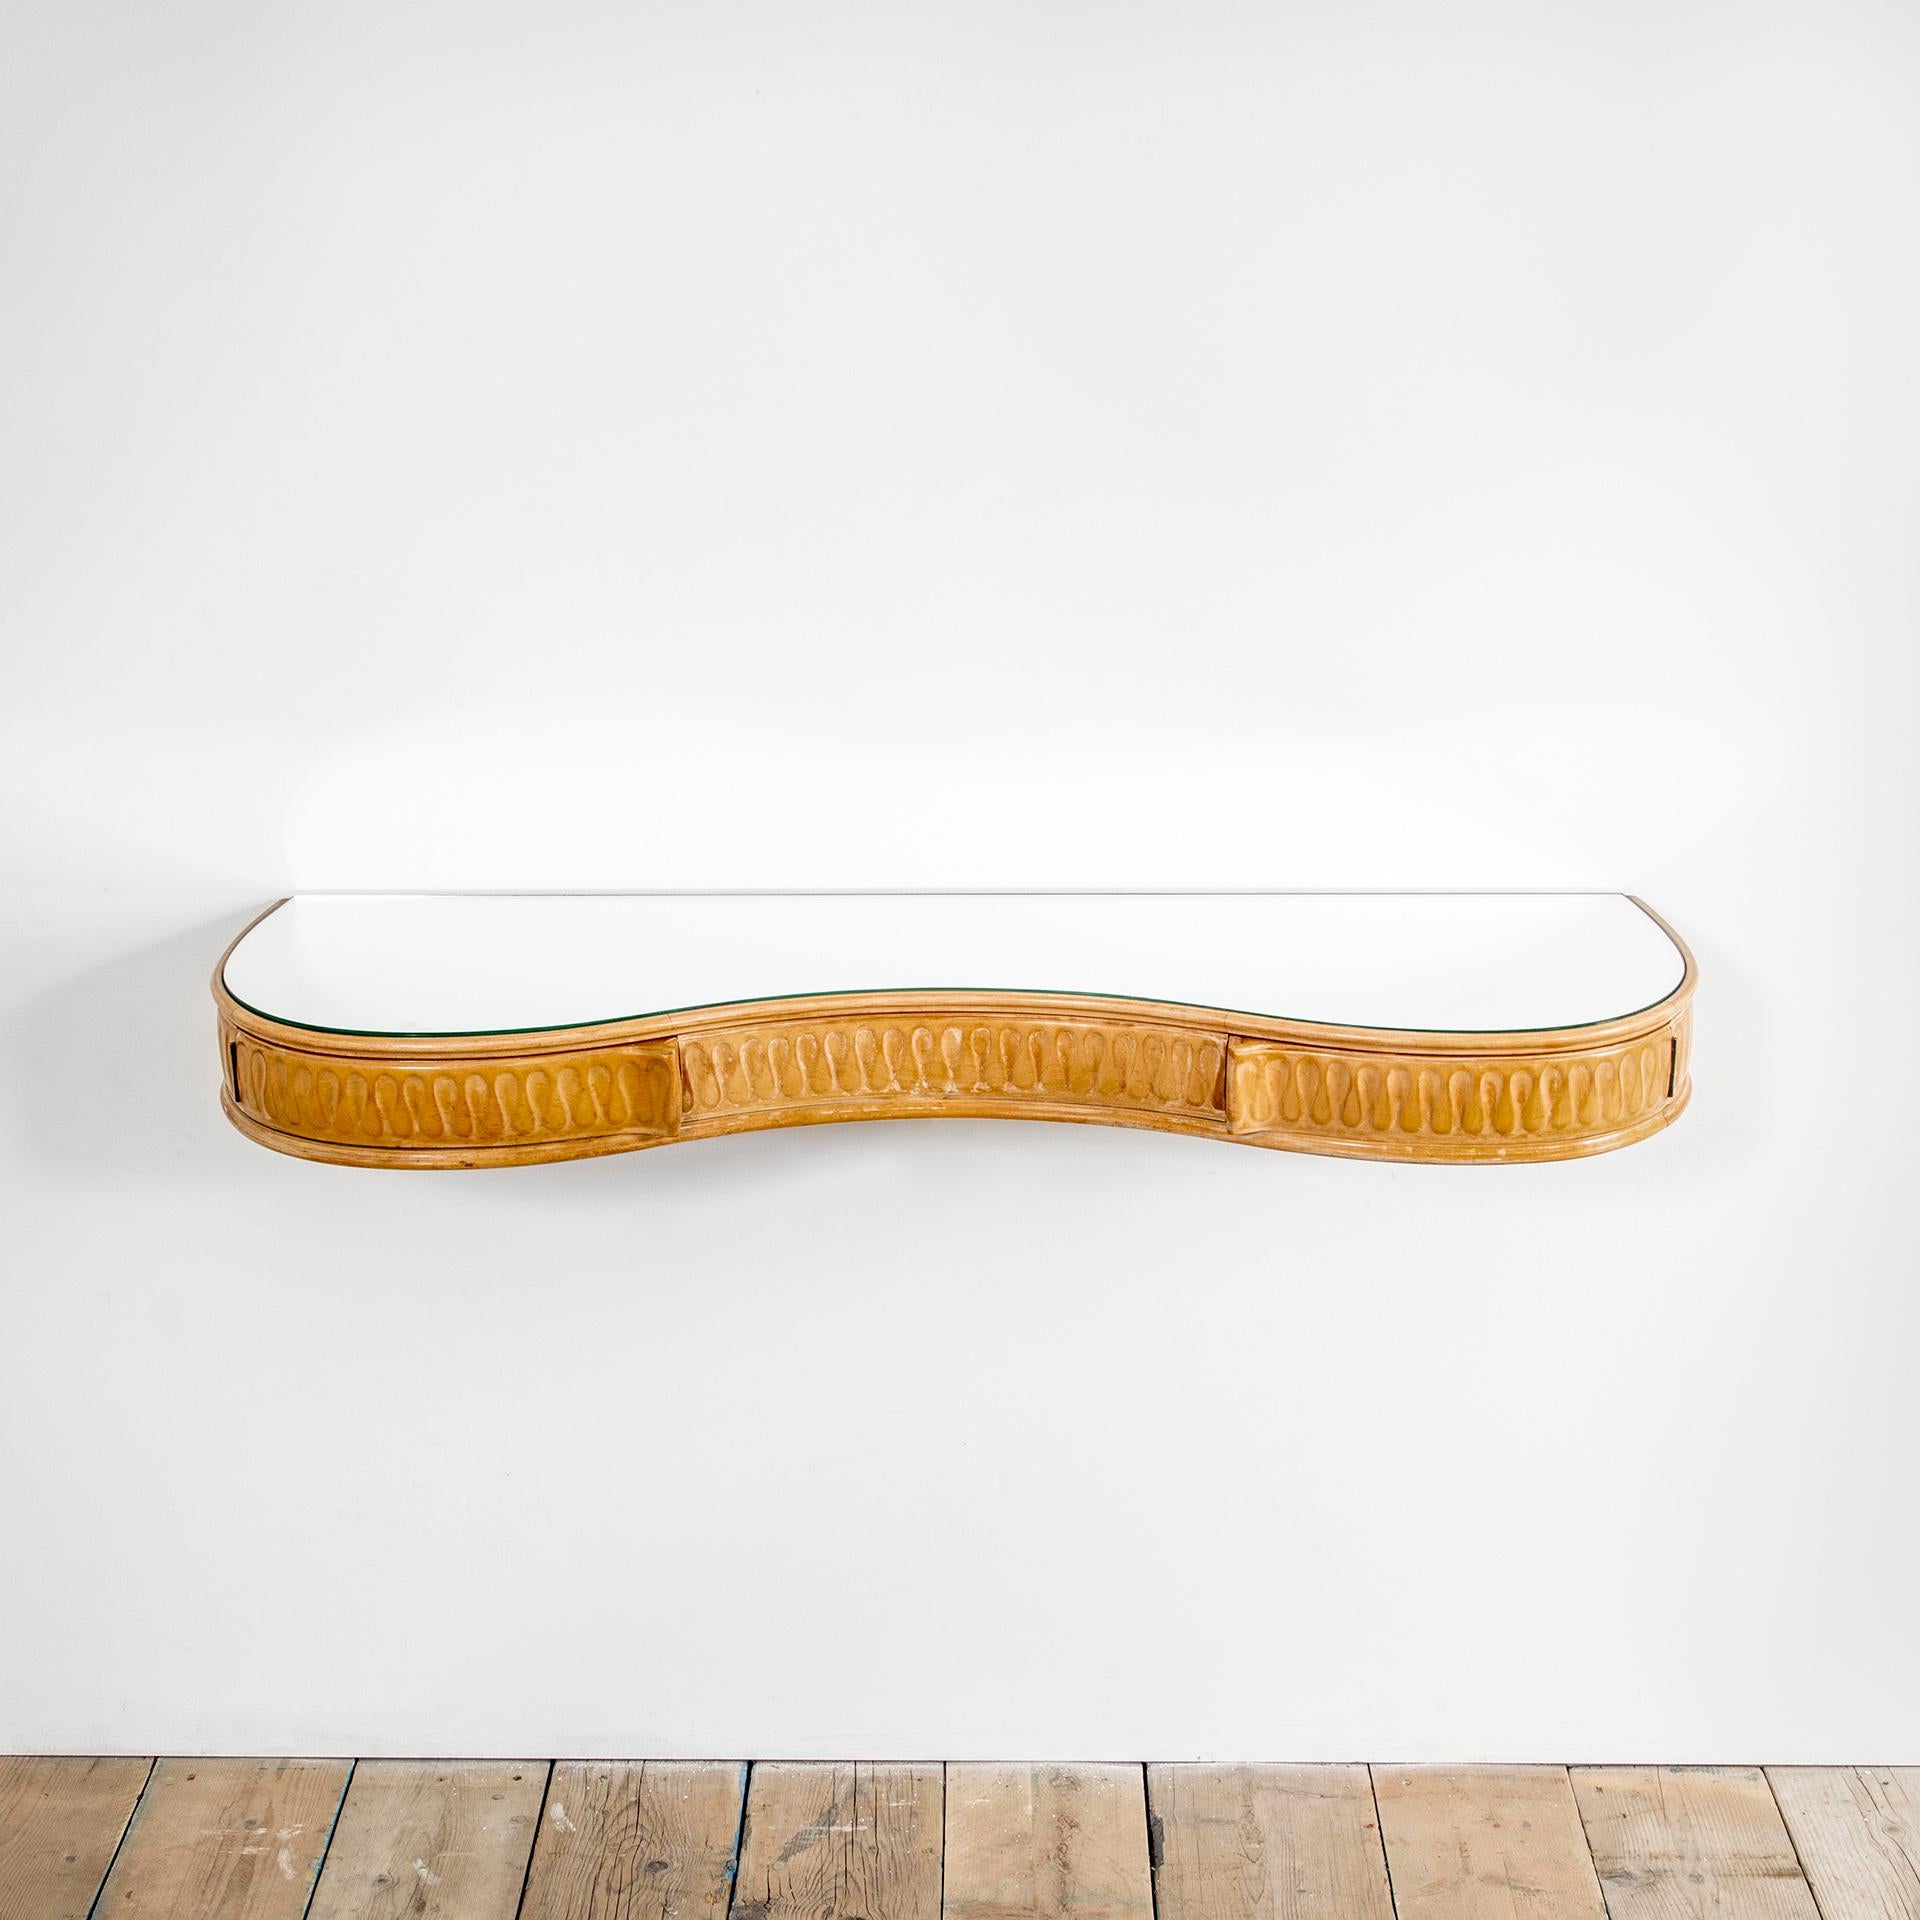 Hanging console table with maple wood frame, shaped glass top and concealed drawers with compass closure. The console was designed by Osvaldo Borsani and produced by Arredamenti Borsani Varedo in 1942. The design was especially made for a private